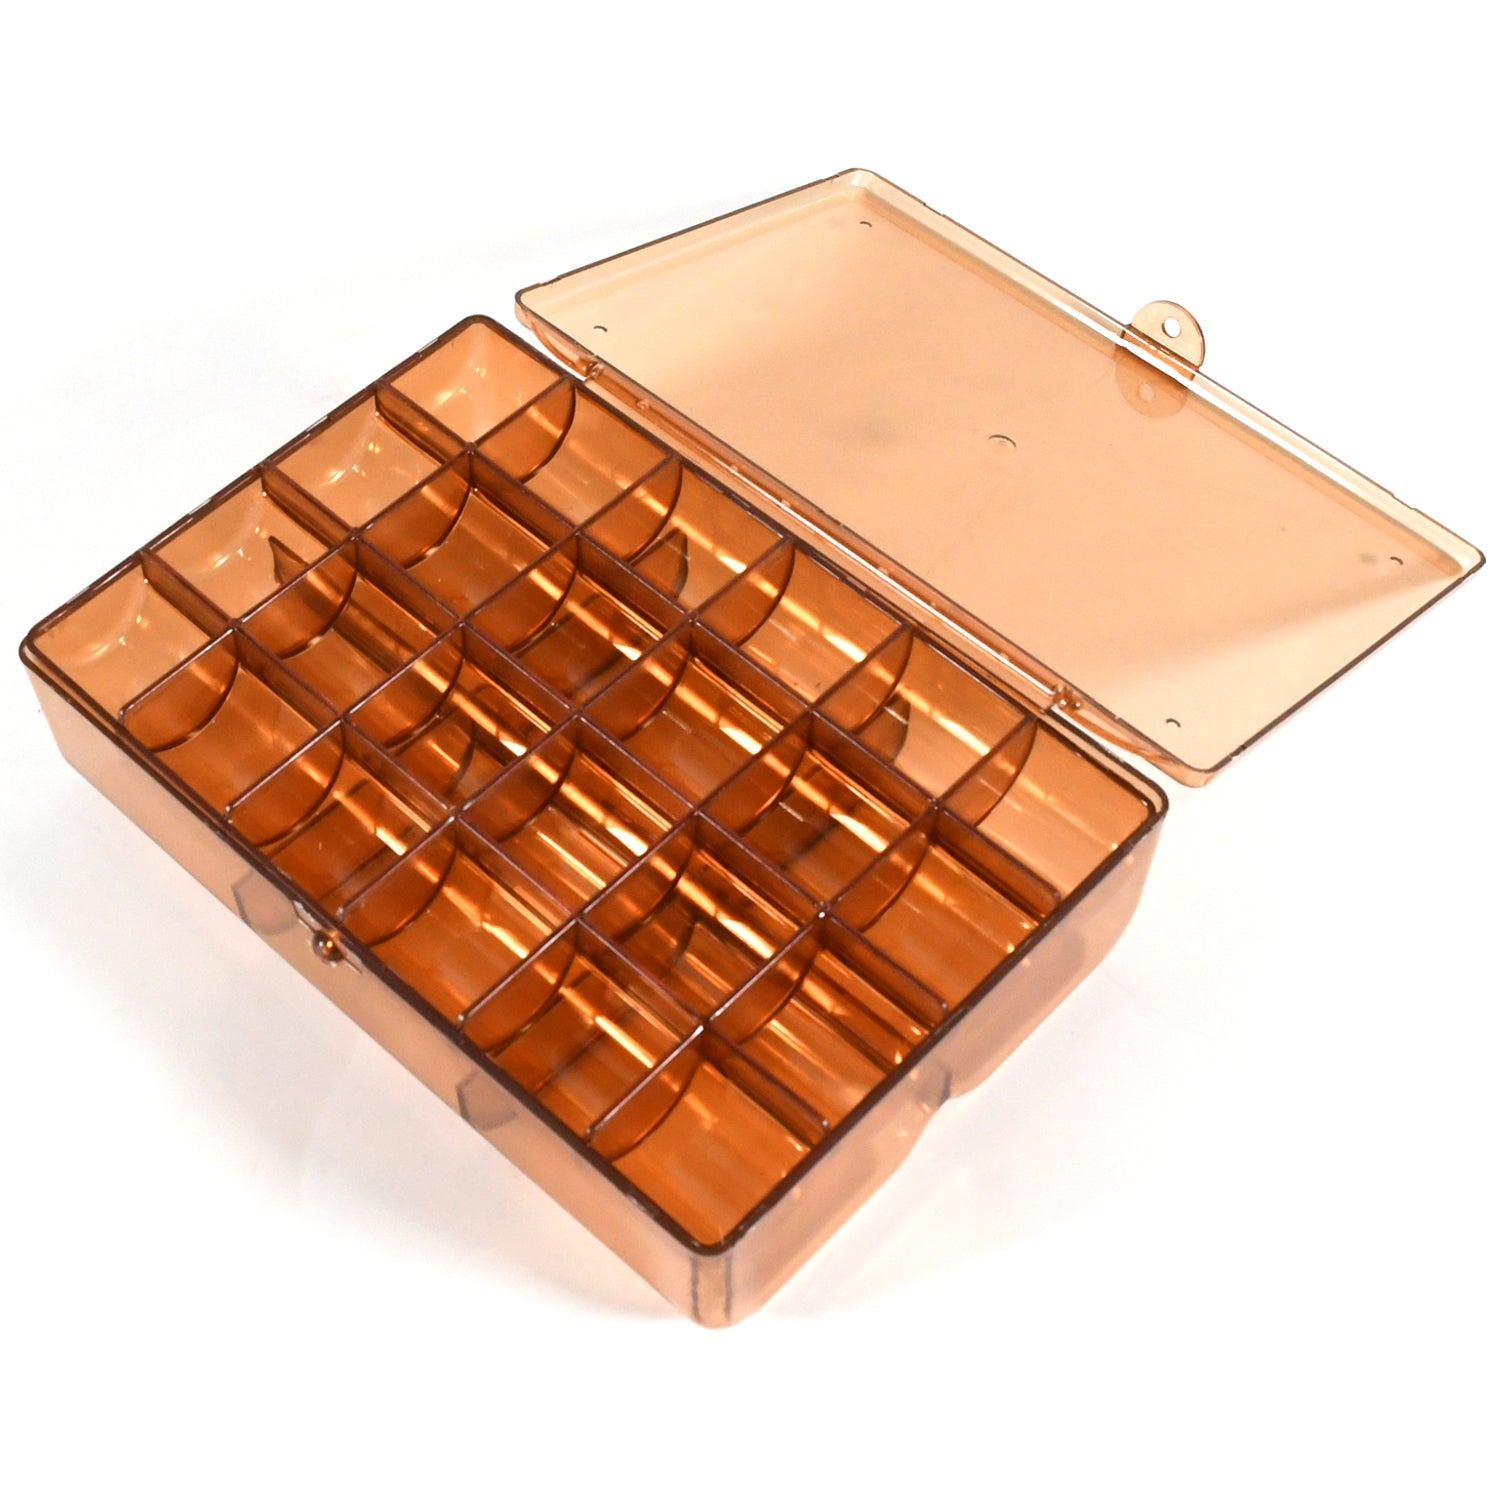 12829 2 layer Acrylic Jewelry Storage Box Dustproof Earring Box, Storage Box Portable Nail Art Storage Case, 24-Grid Small and 6-Grid Big case Makeup Vanity Box (1 Pc / 30 Compartment)